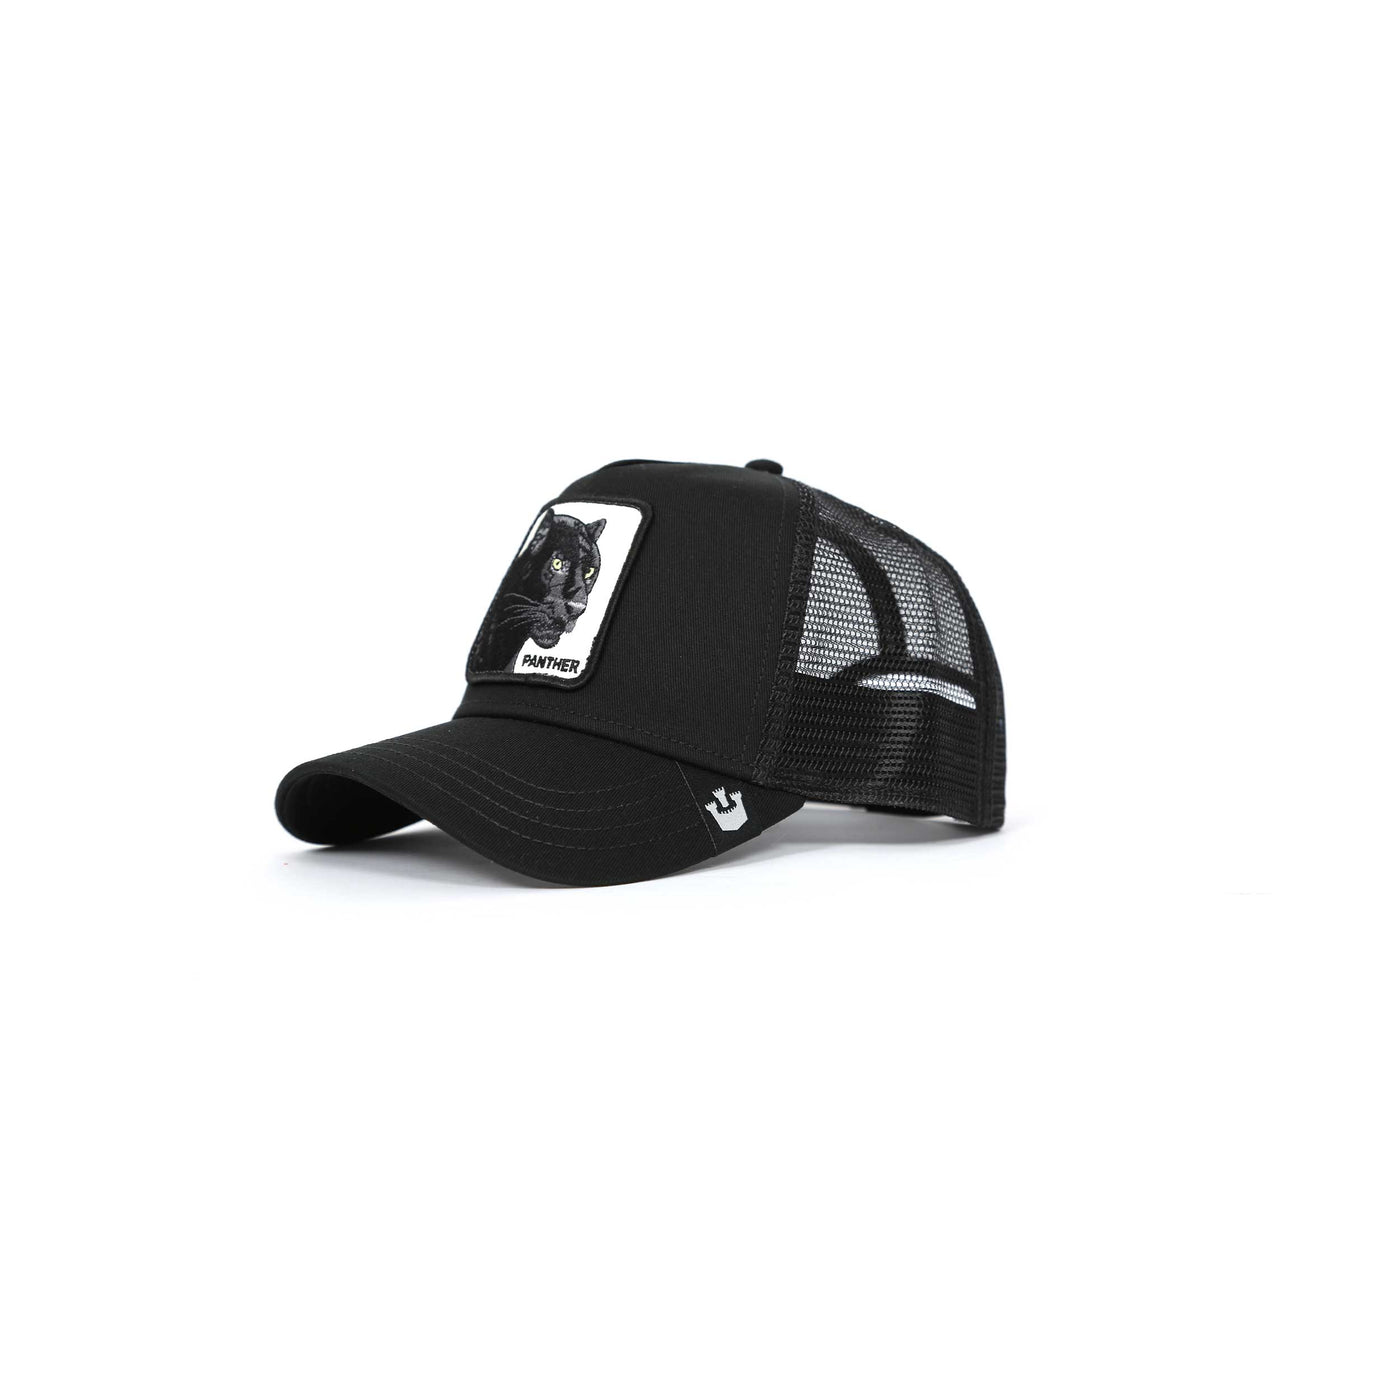 Goorin Bros The Panther Trucker Cap in Black Angle